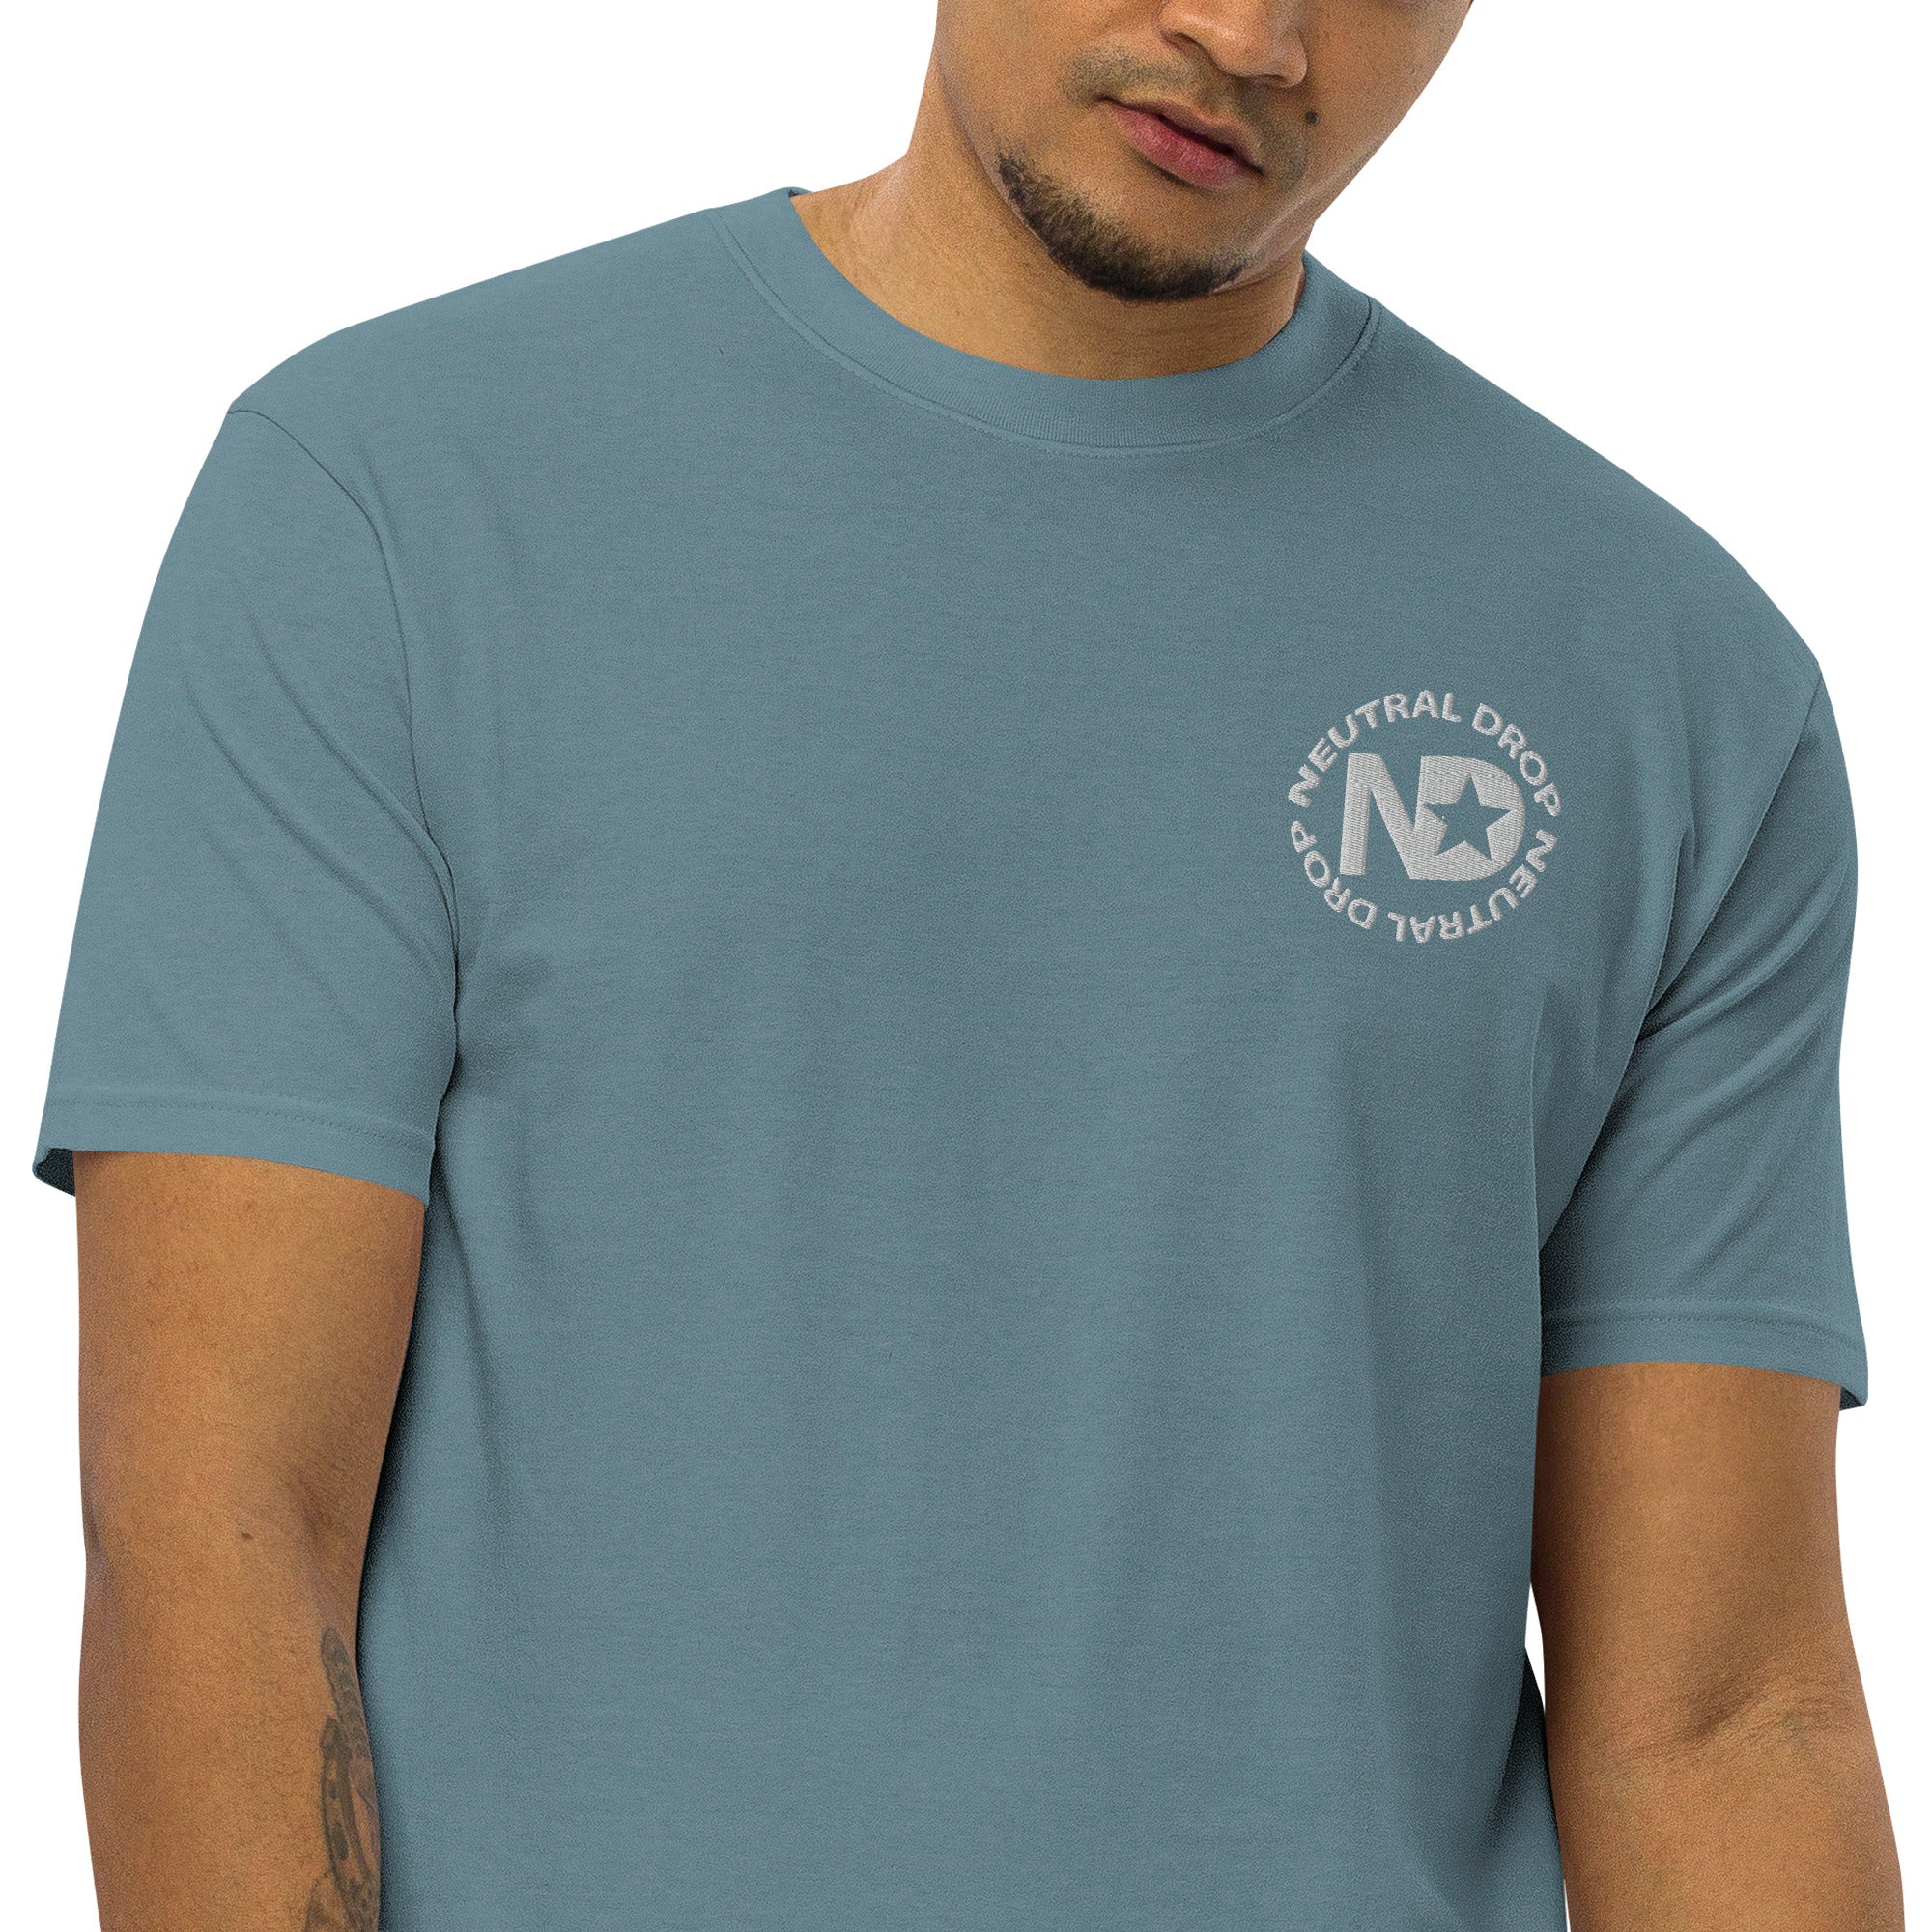 Men’s premium heavyweight tee with Neutral Drop logo on front